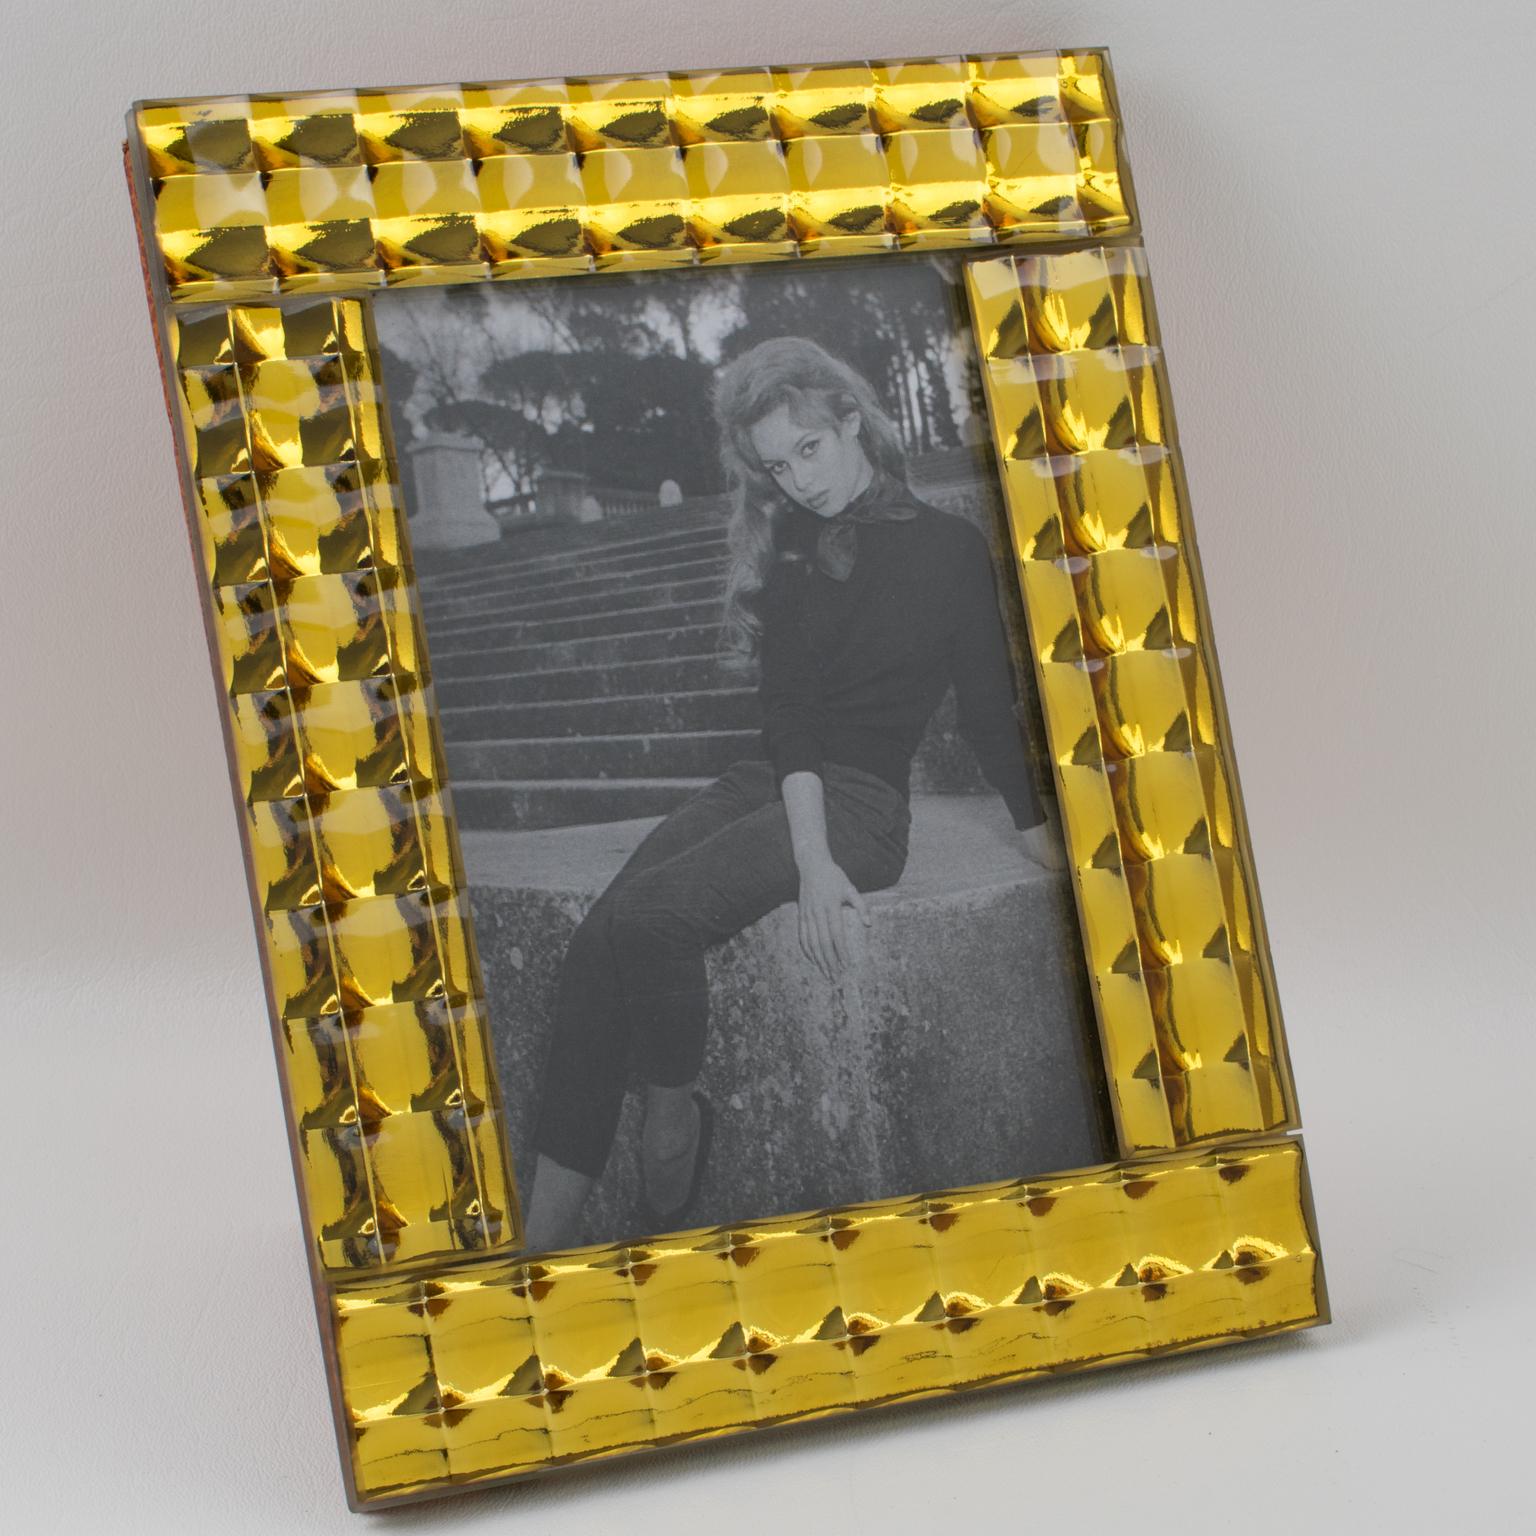 Stunning French mirrored picture photo frame. Lovely yellow dijon mustard colored mirrors. Framing is built with tiny little domed square mirrors with metallic Kinetic effects. The picture frame can be placed either in portrait or in landscape